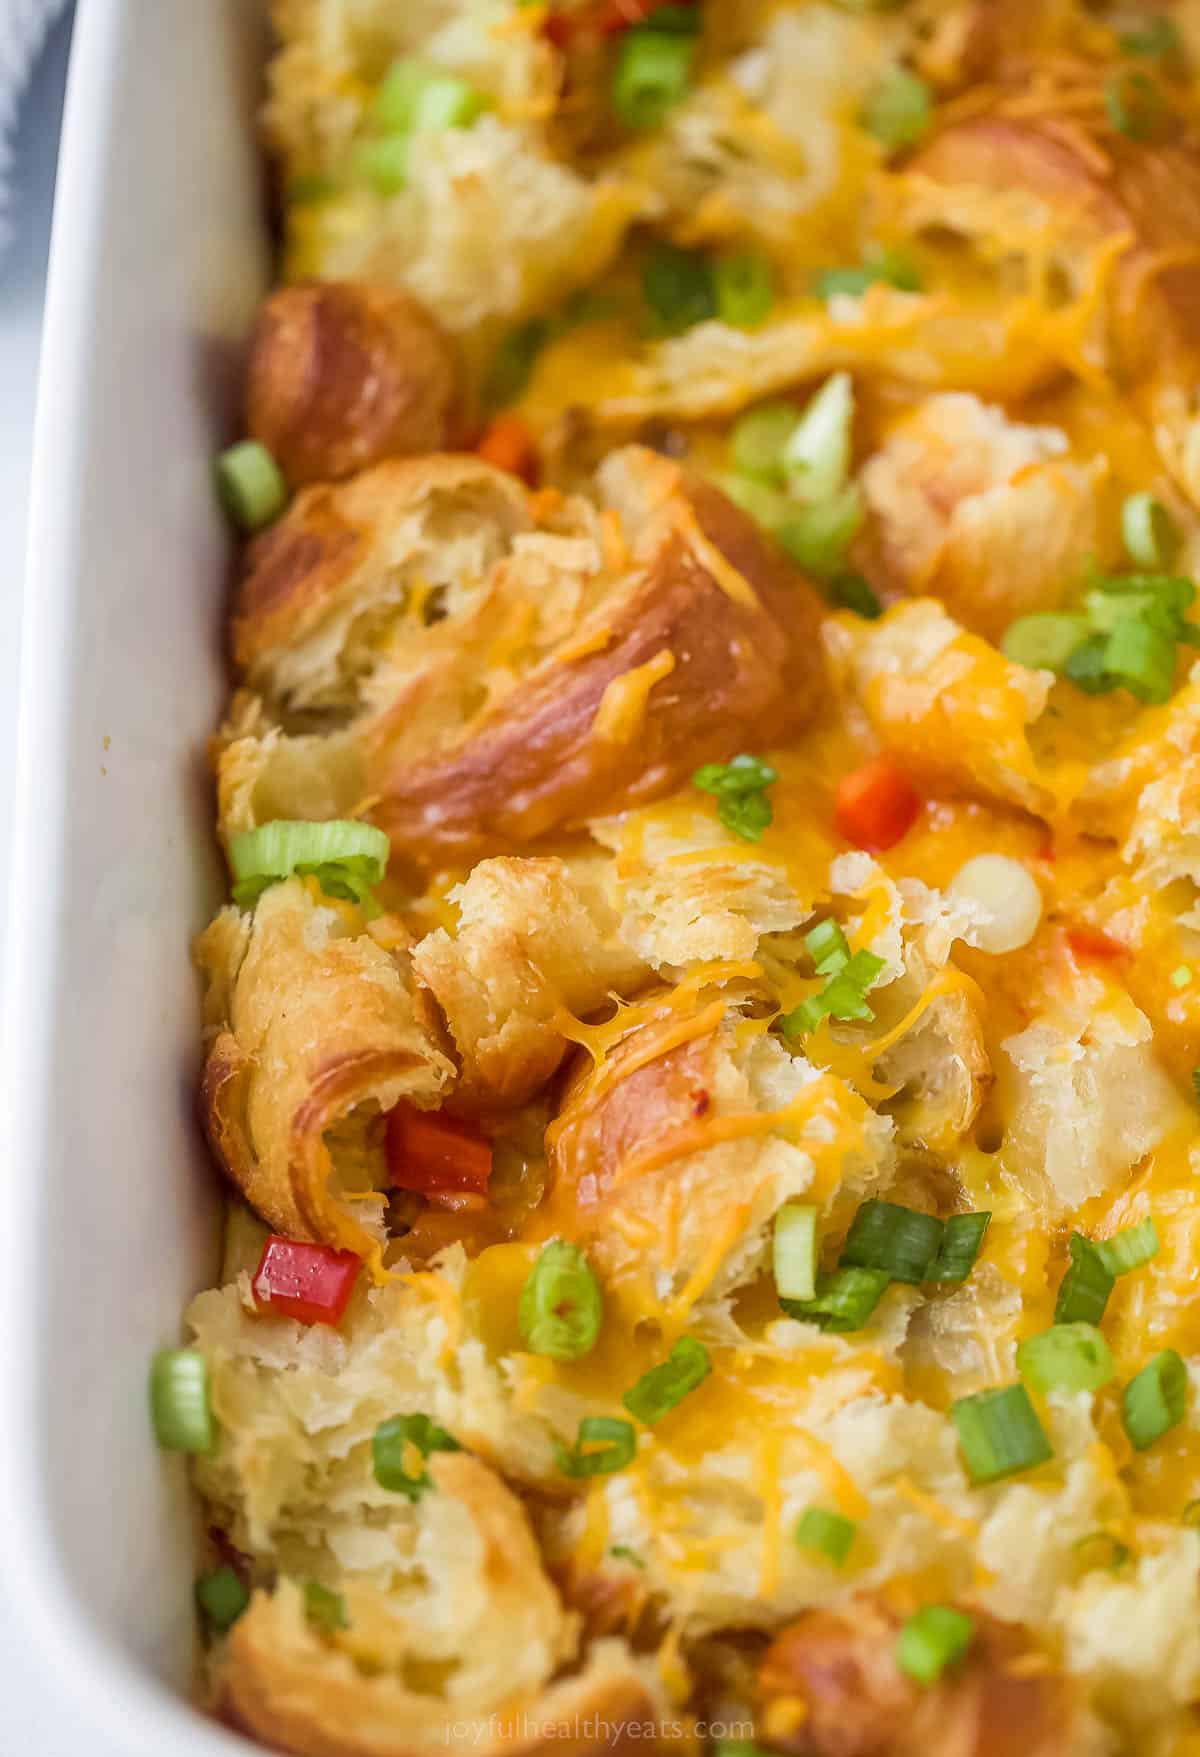 close up of a breakfast casserole made with cut up croissants, sausage, cheese, green onions, and red peppers